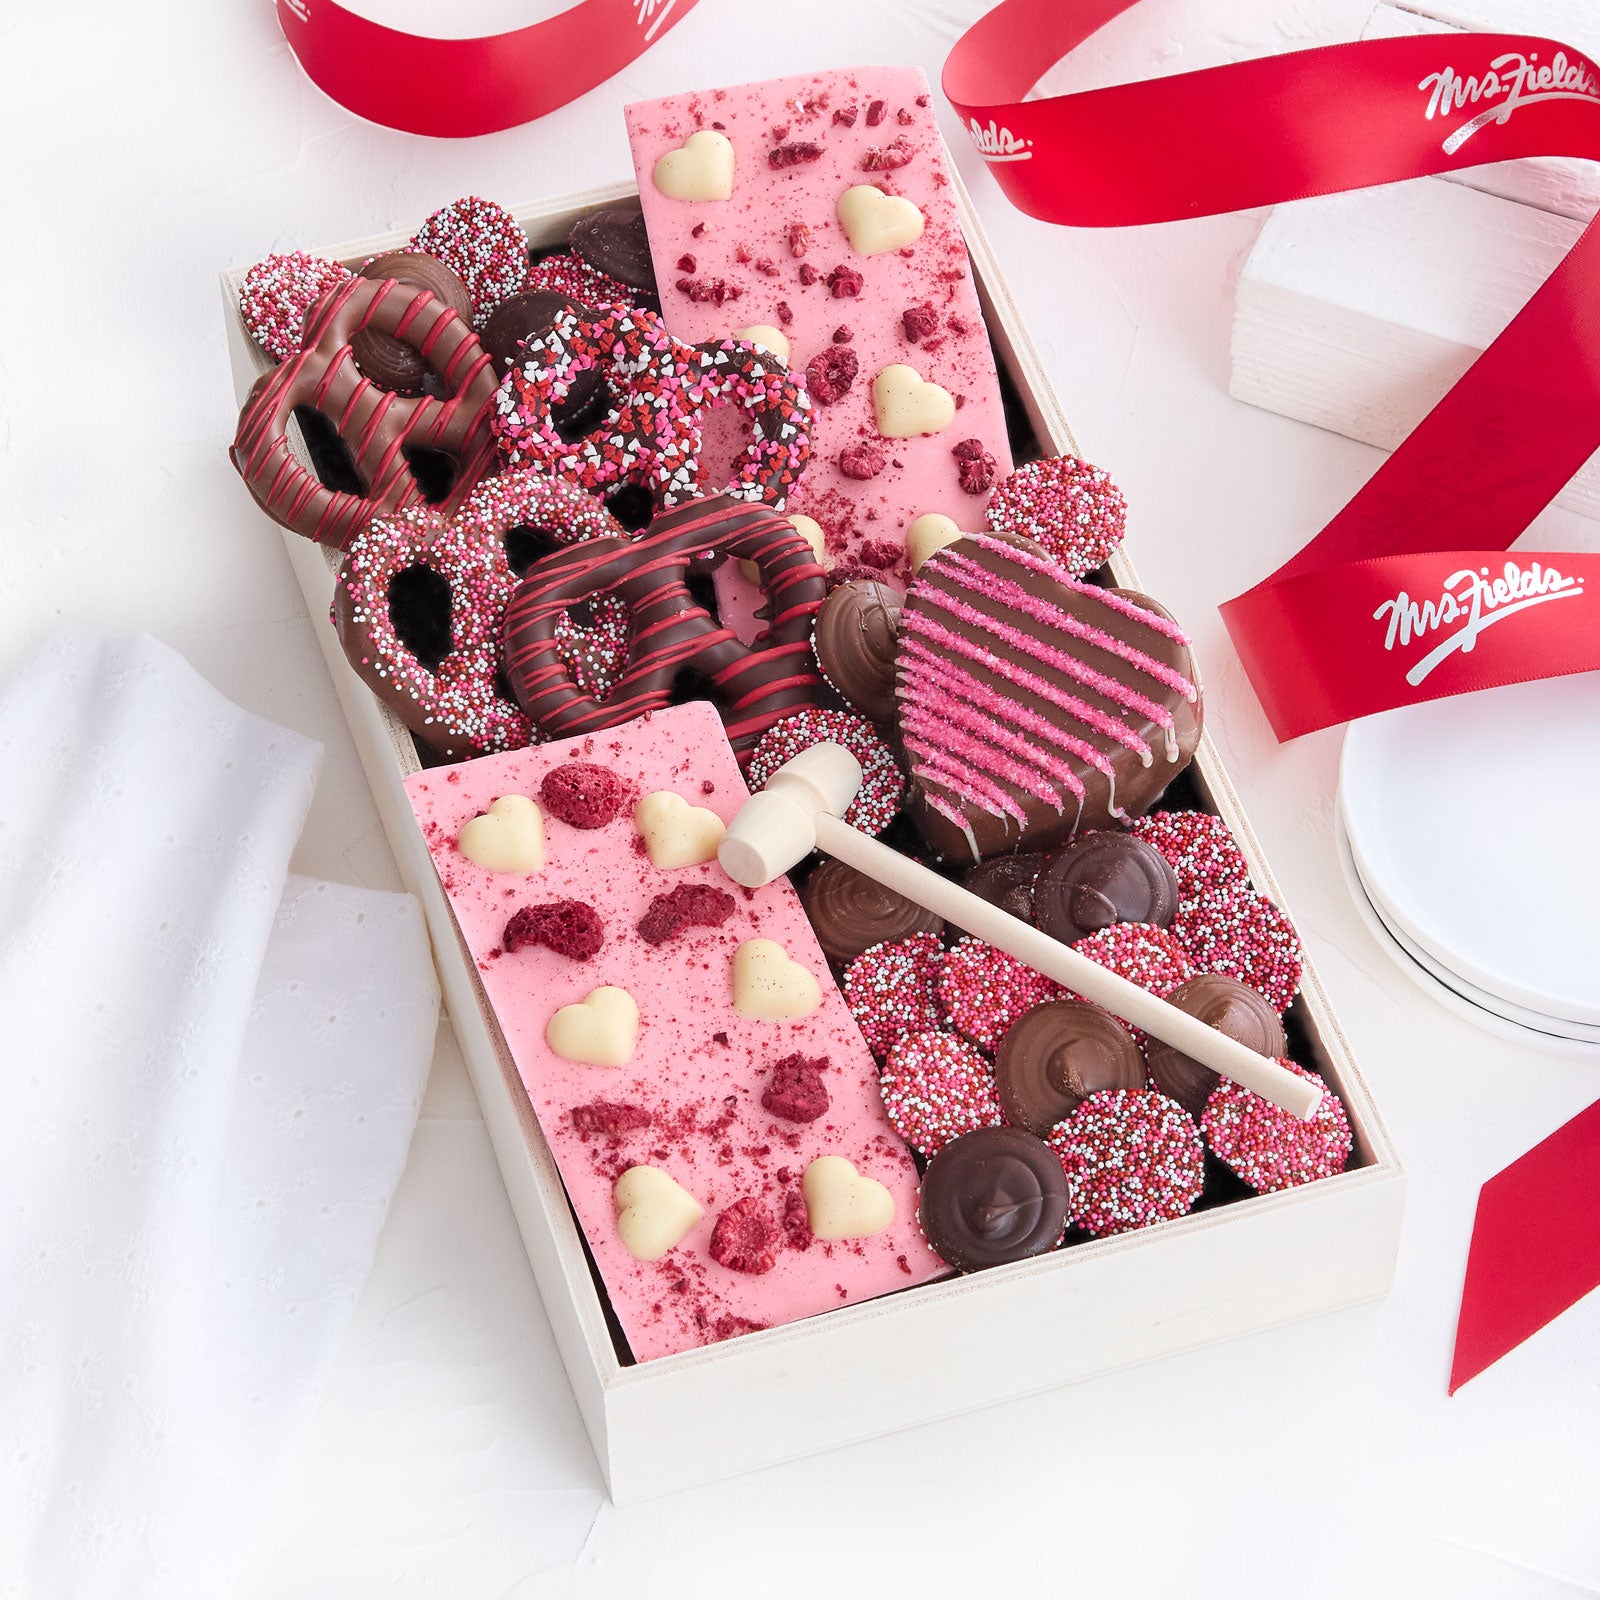 Valentine's Day themed chocolates and chocolate covered pretzels in a tray